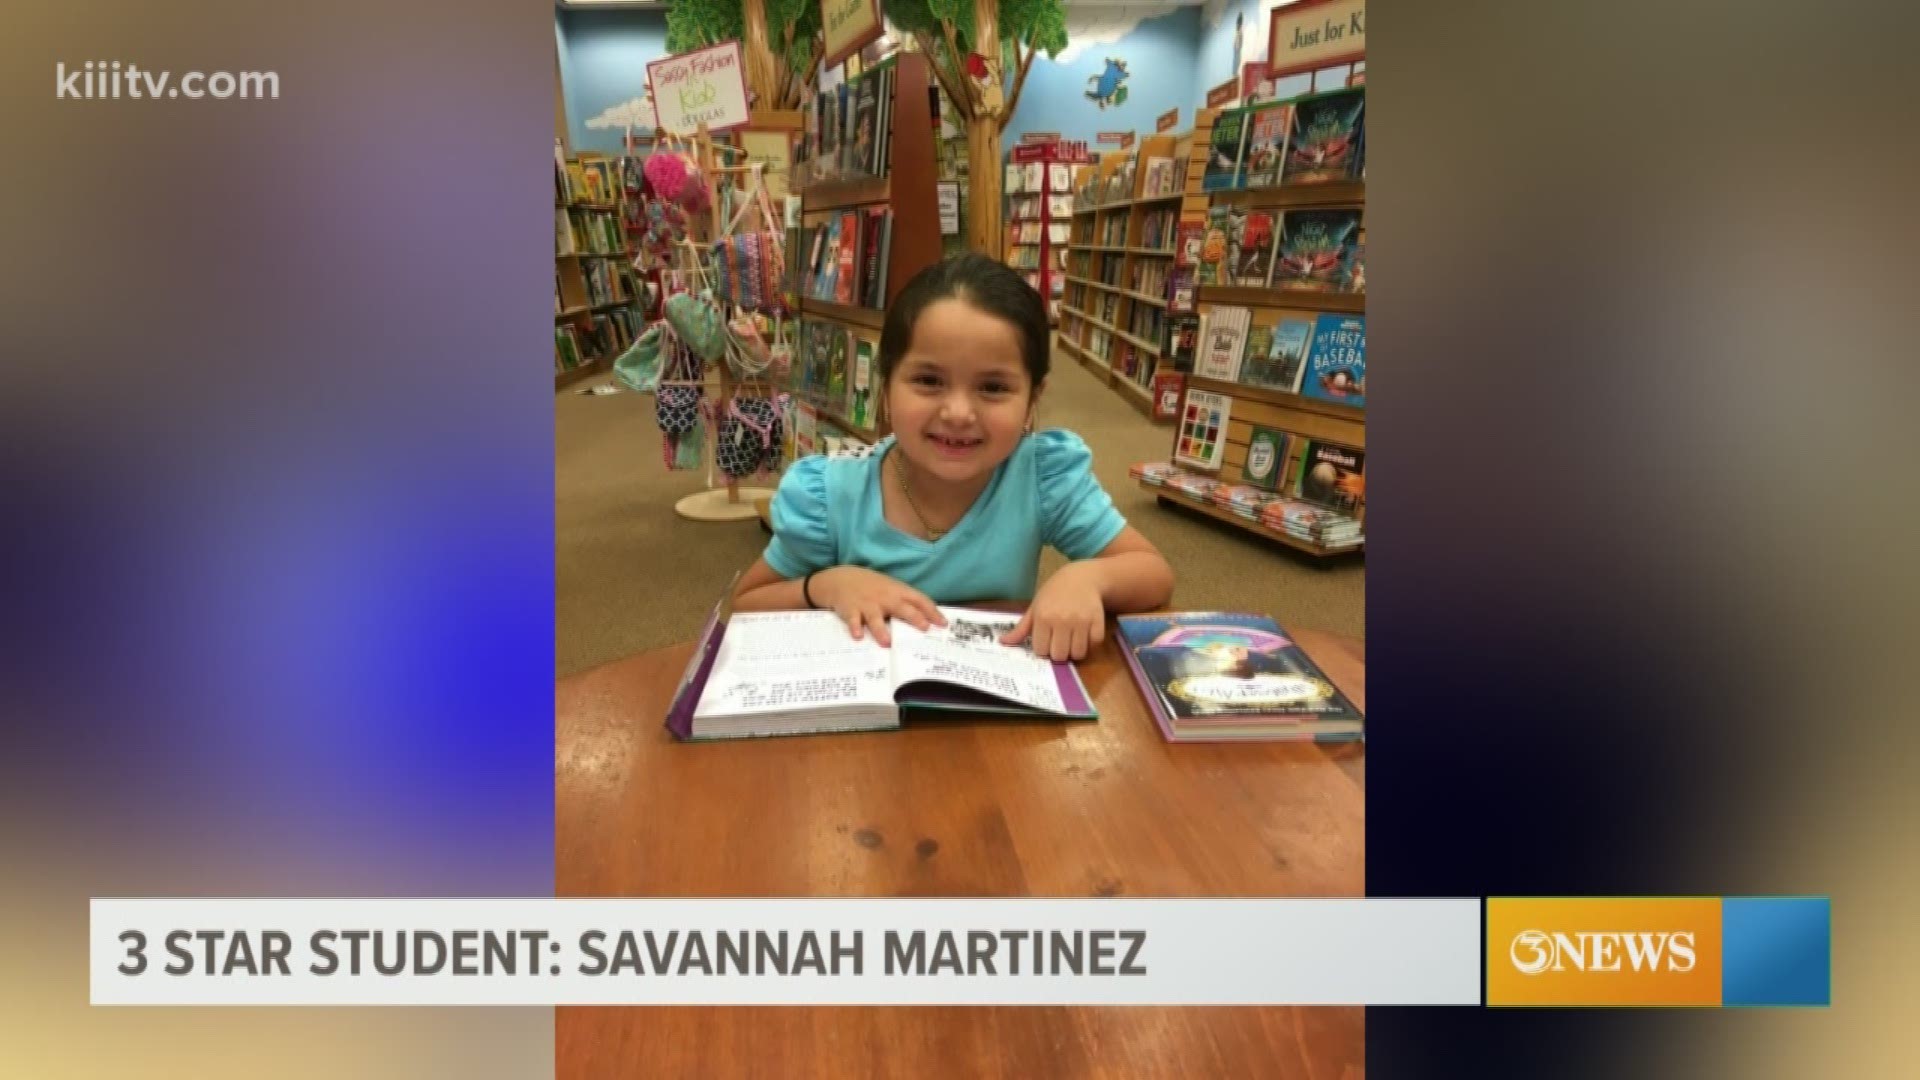 At 11 years old, this fifth grader wants to do it all. Savannah Martinez of Rose Shaw Elementary School is our 3Star Student!